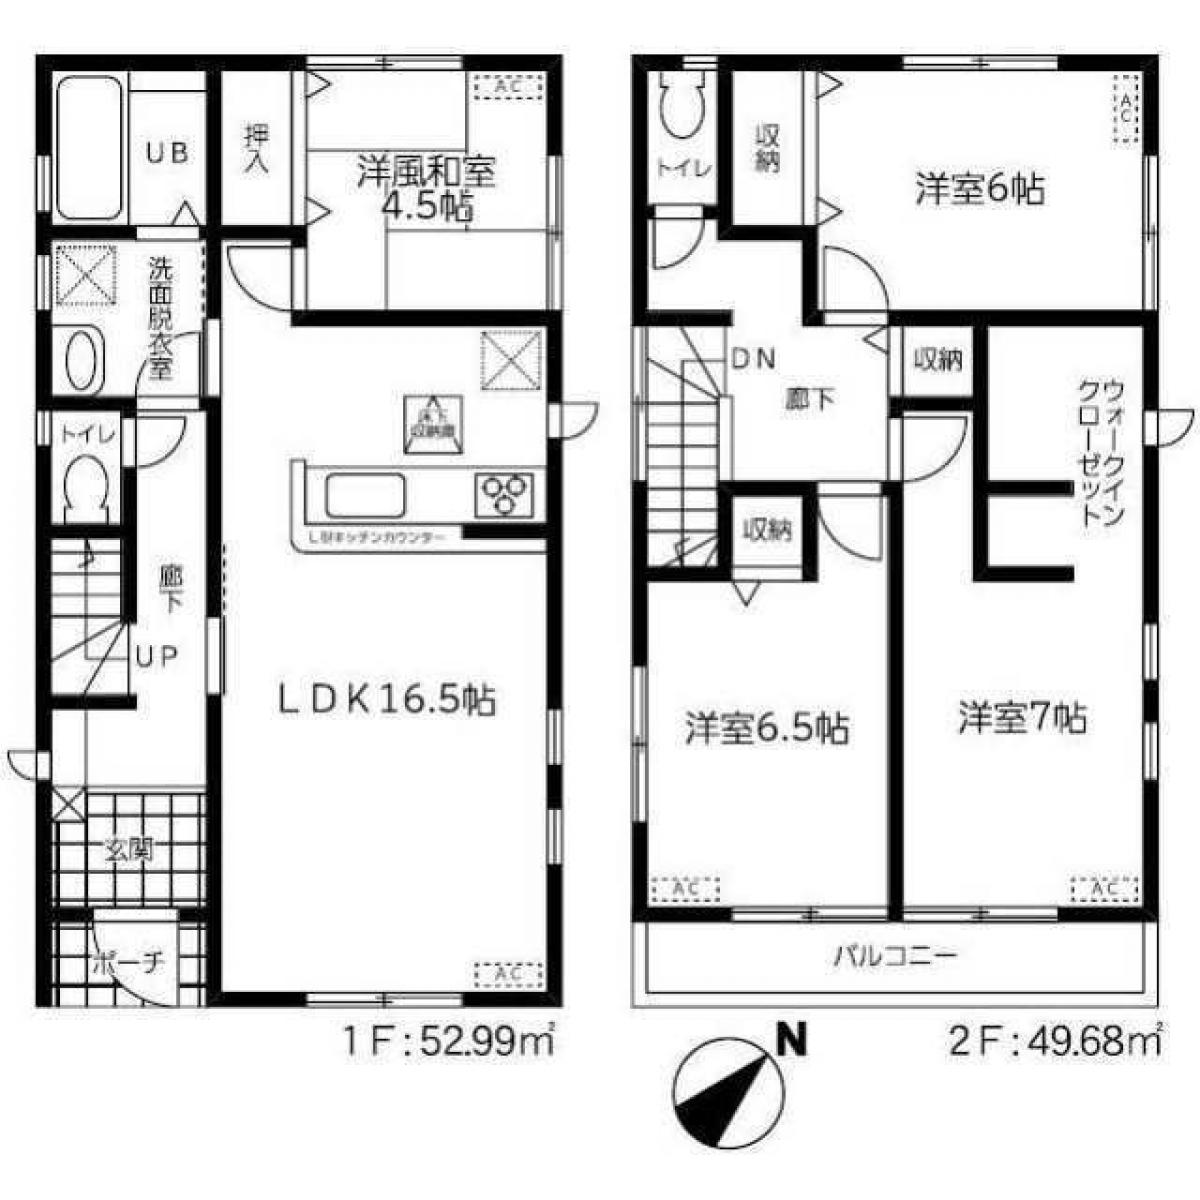 Picture of Home For Sale in Yachiyo Shi, Chiba, Japan